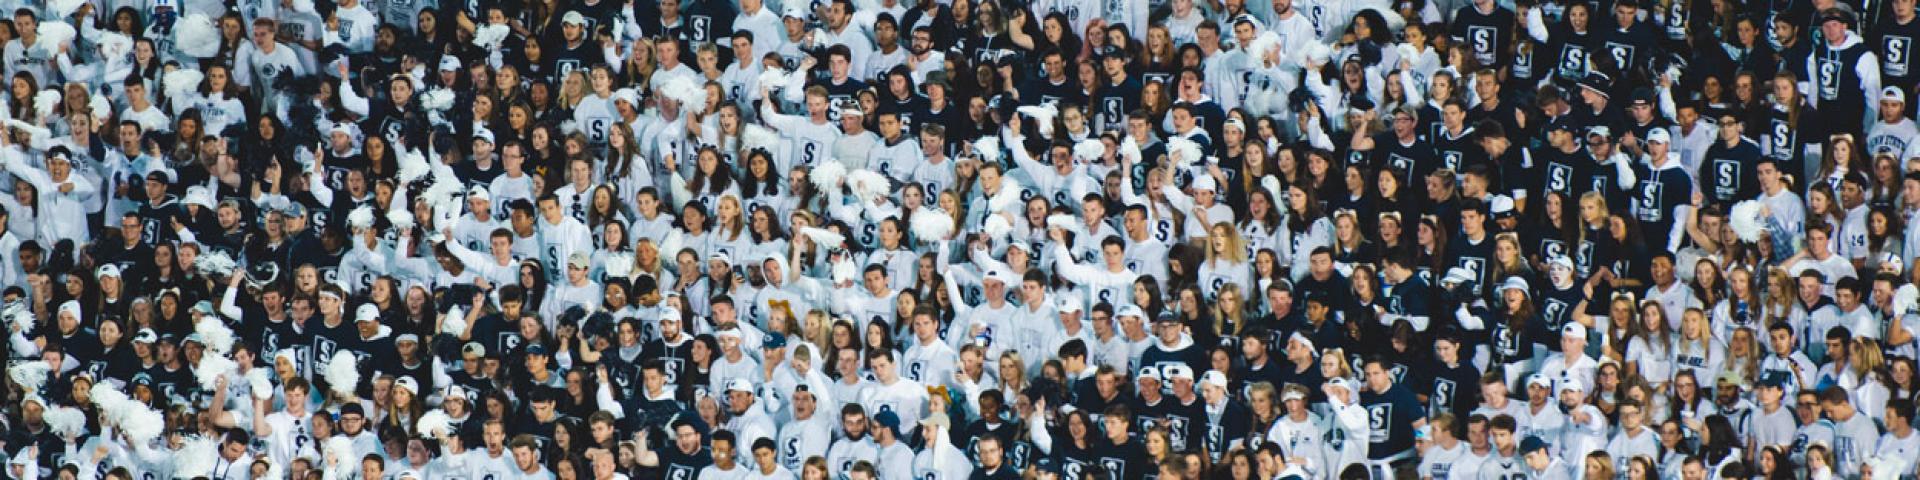 Crowd photo at Penn State Football Game